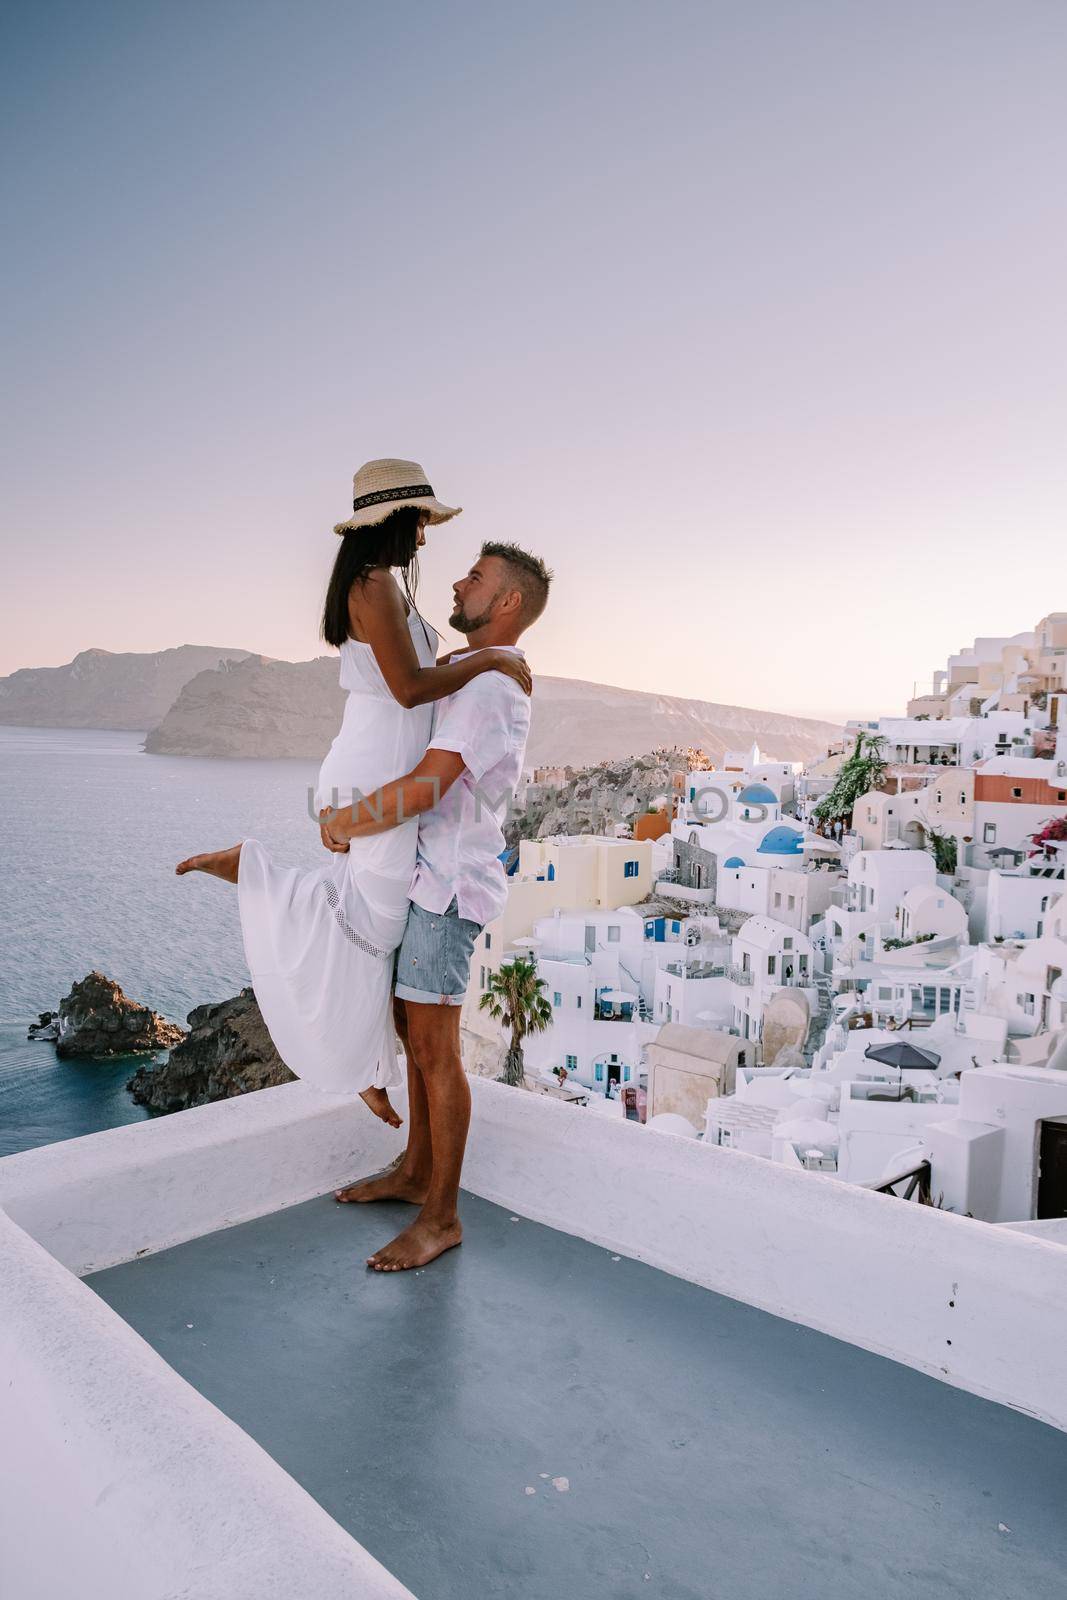 Santorini Greece, young couple on luxury vacation at the Island of Santorini watching sunrise by the blue dome church and whitewashed village of Oia Santorini Greece  by fokkebok